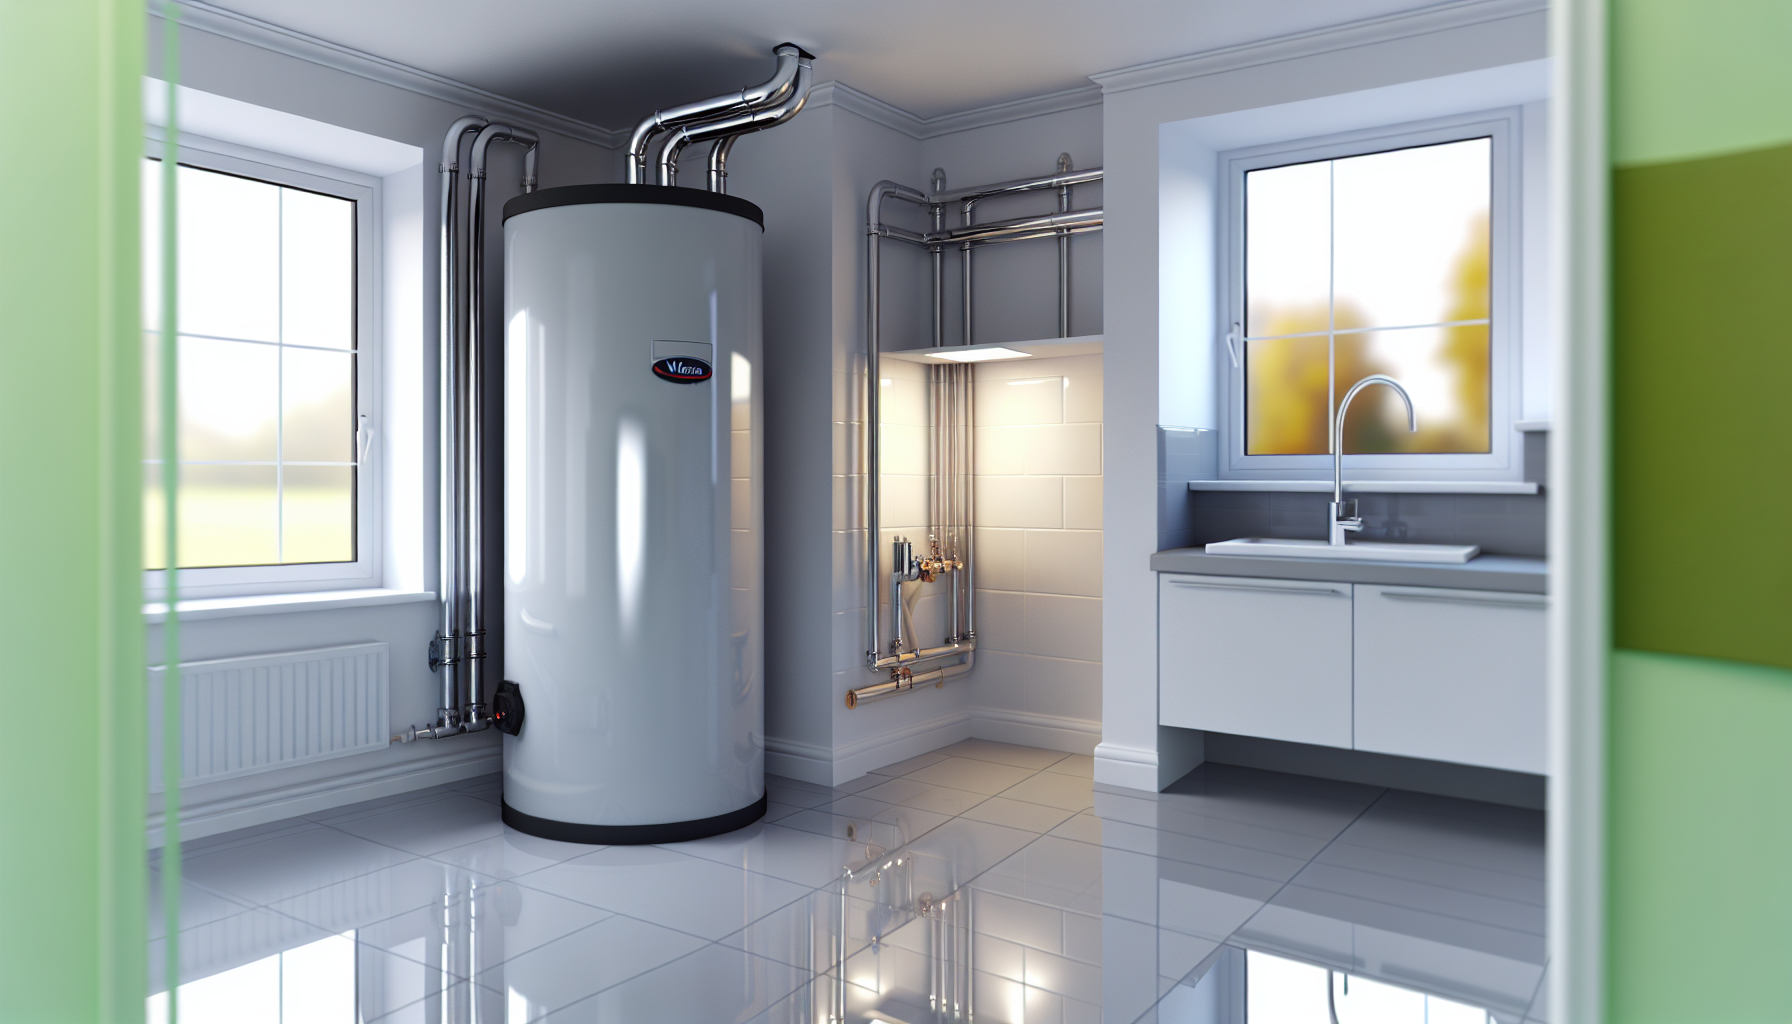 Vulcan hot water system in a modern household